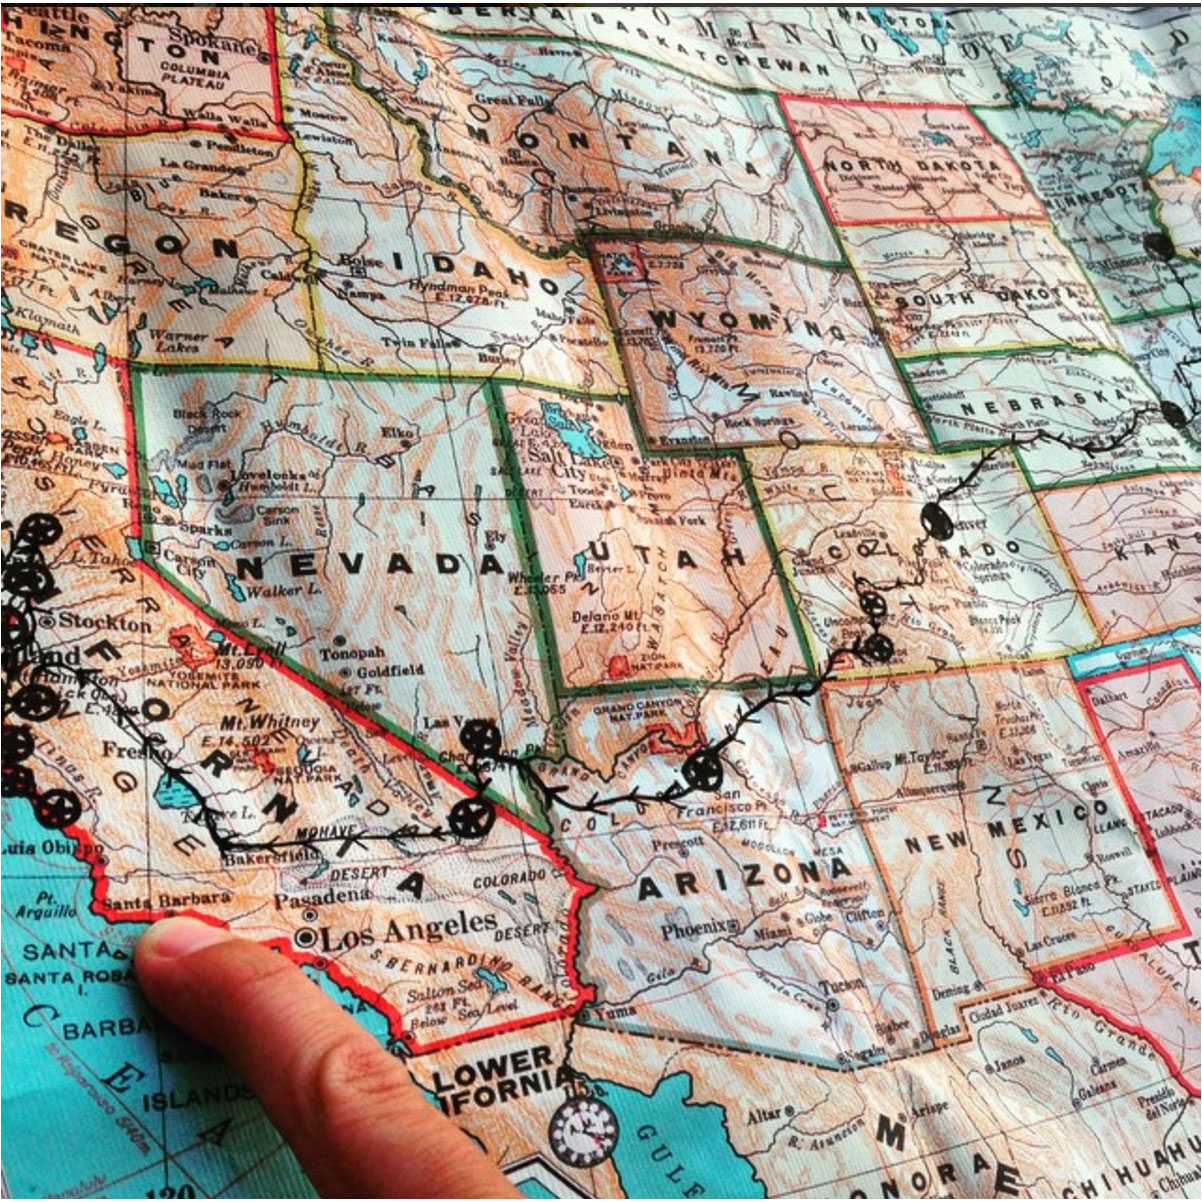 Pointing a finger on a map and going. ‪#‎RoadtriptoElsewhere‬ ‪#‎RoadWarriors‬